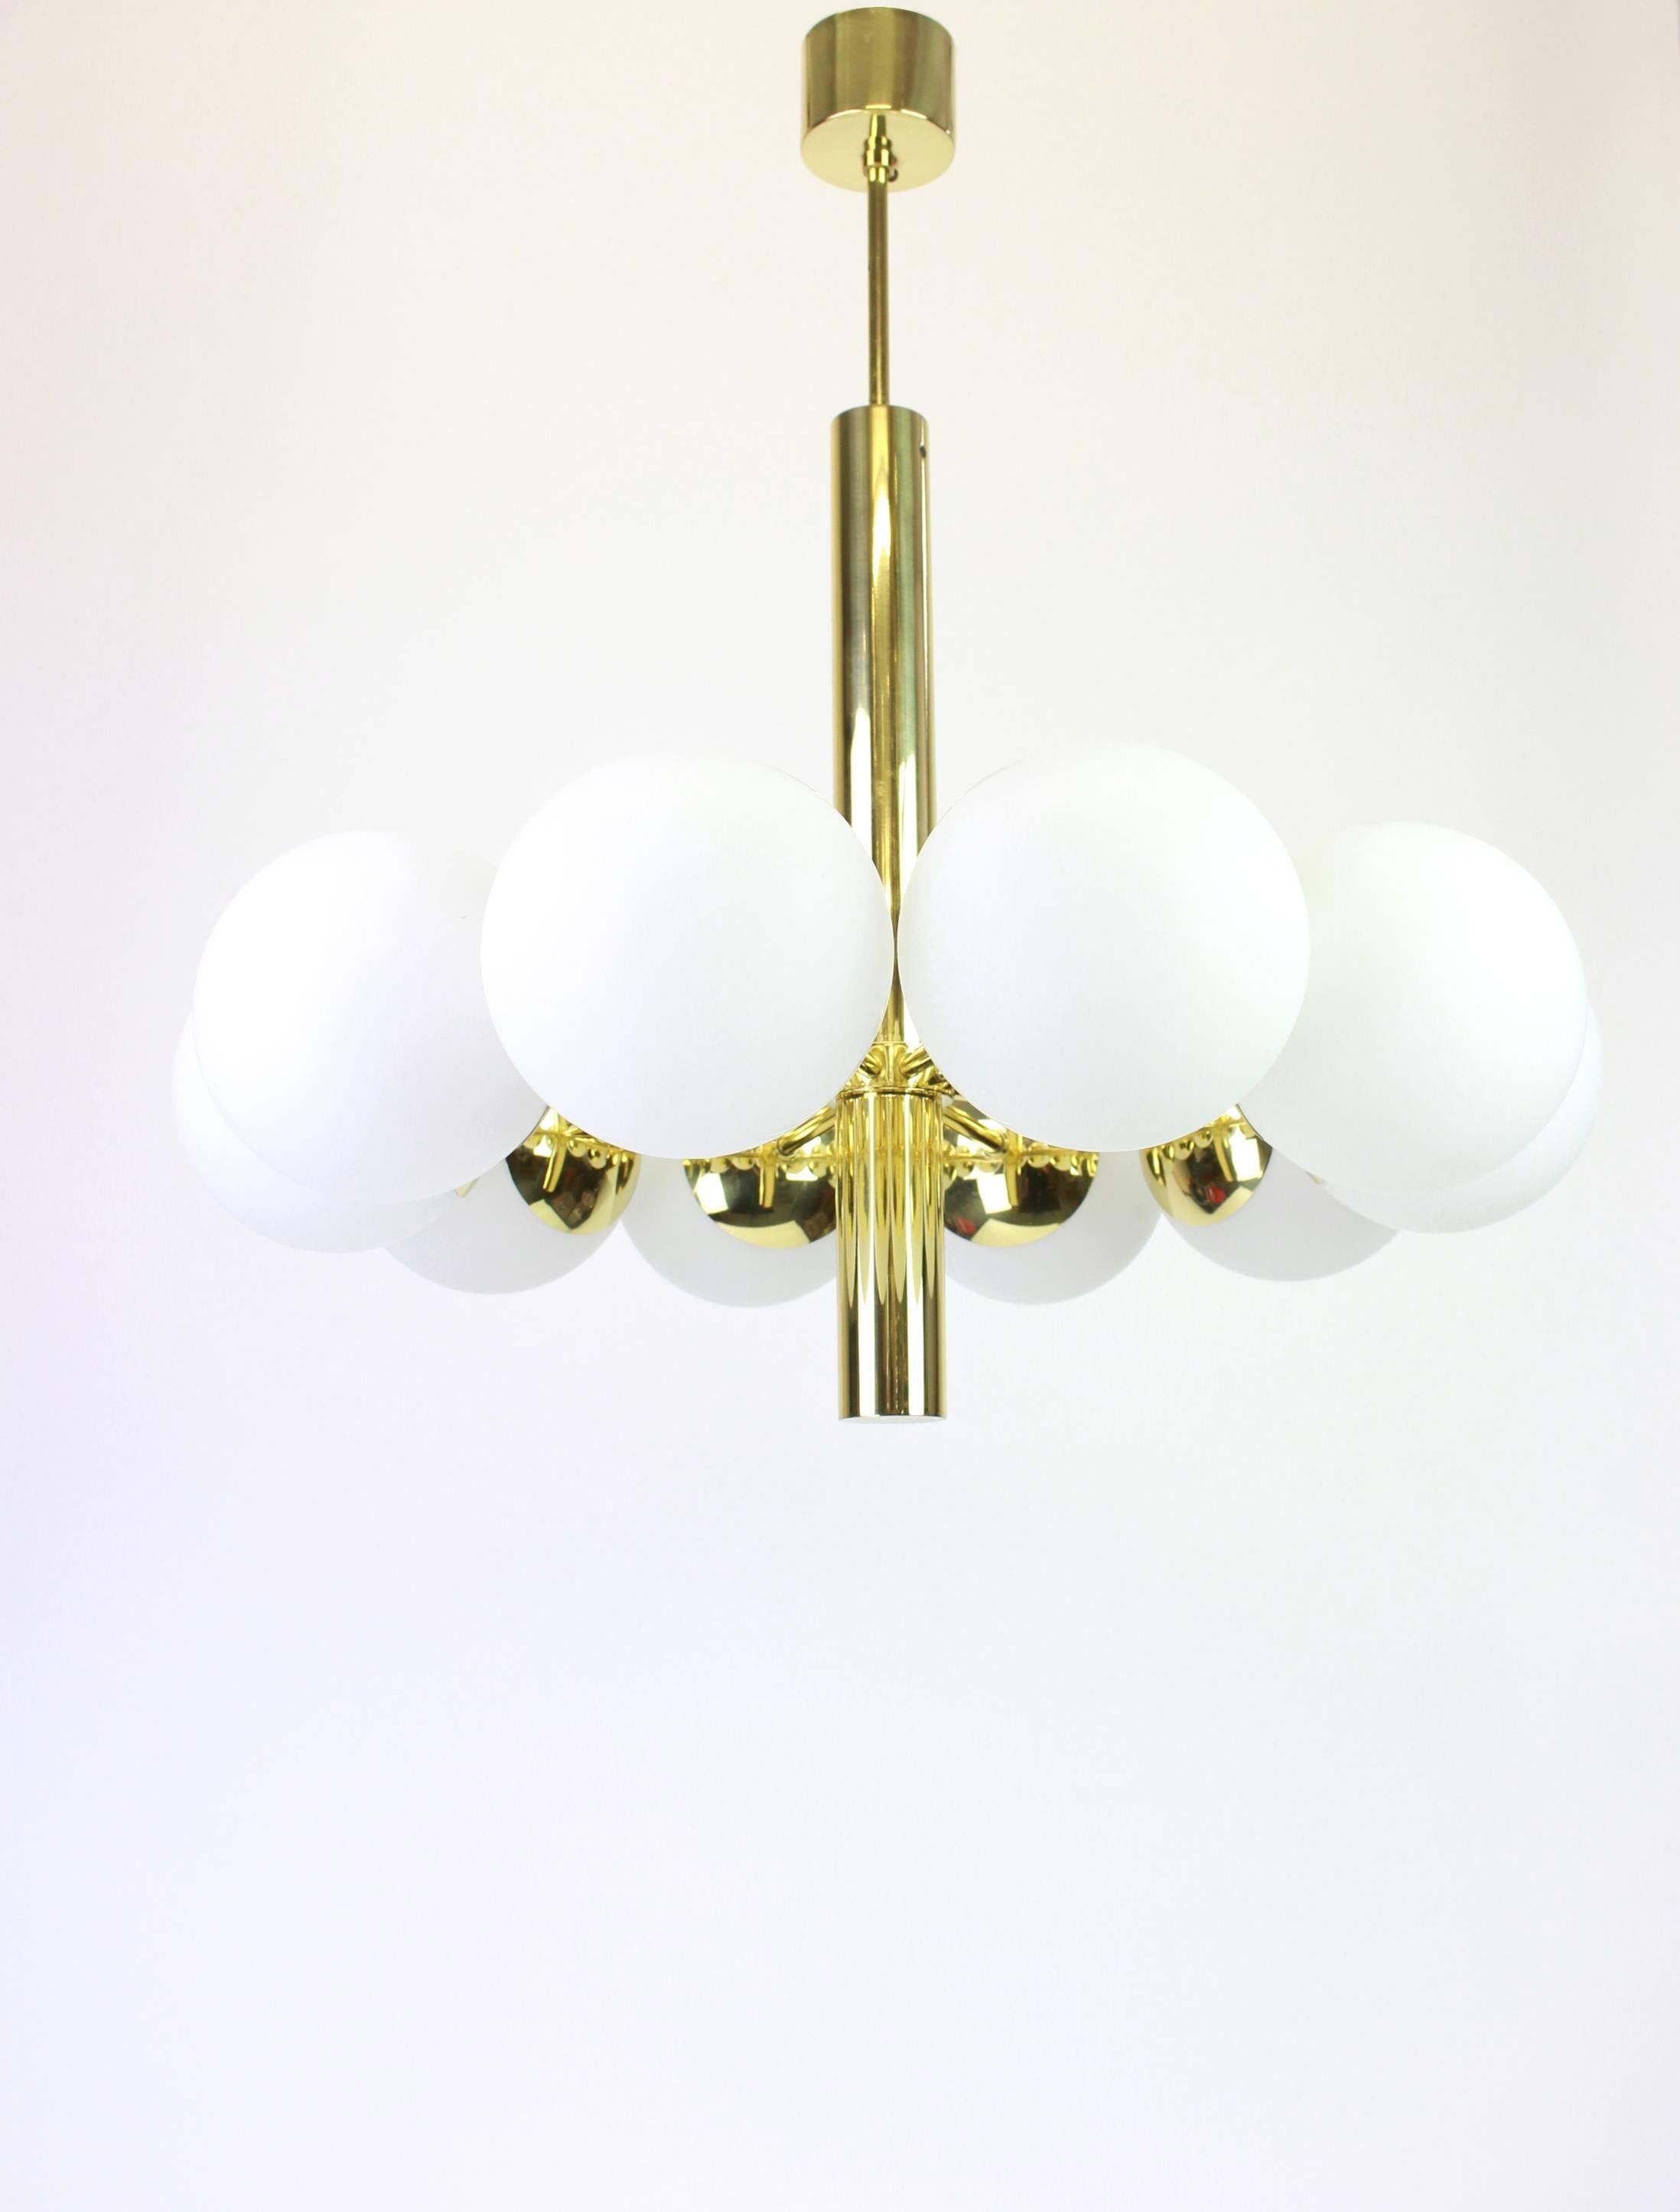 Stunning radial Sputnik brass chandelier with six opal glass globes by Kaiser Leuchten, Germany, 1960s.

High quality and in very good condition. Cleaned, well-wired and ready to use. 

The fixture requires 10 x E14 standard bulbs with 40W max